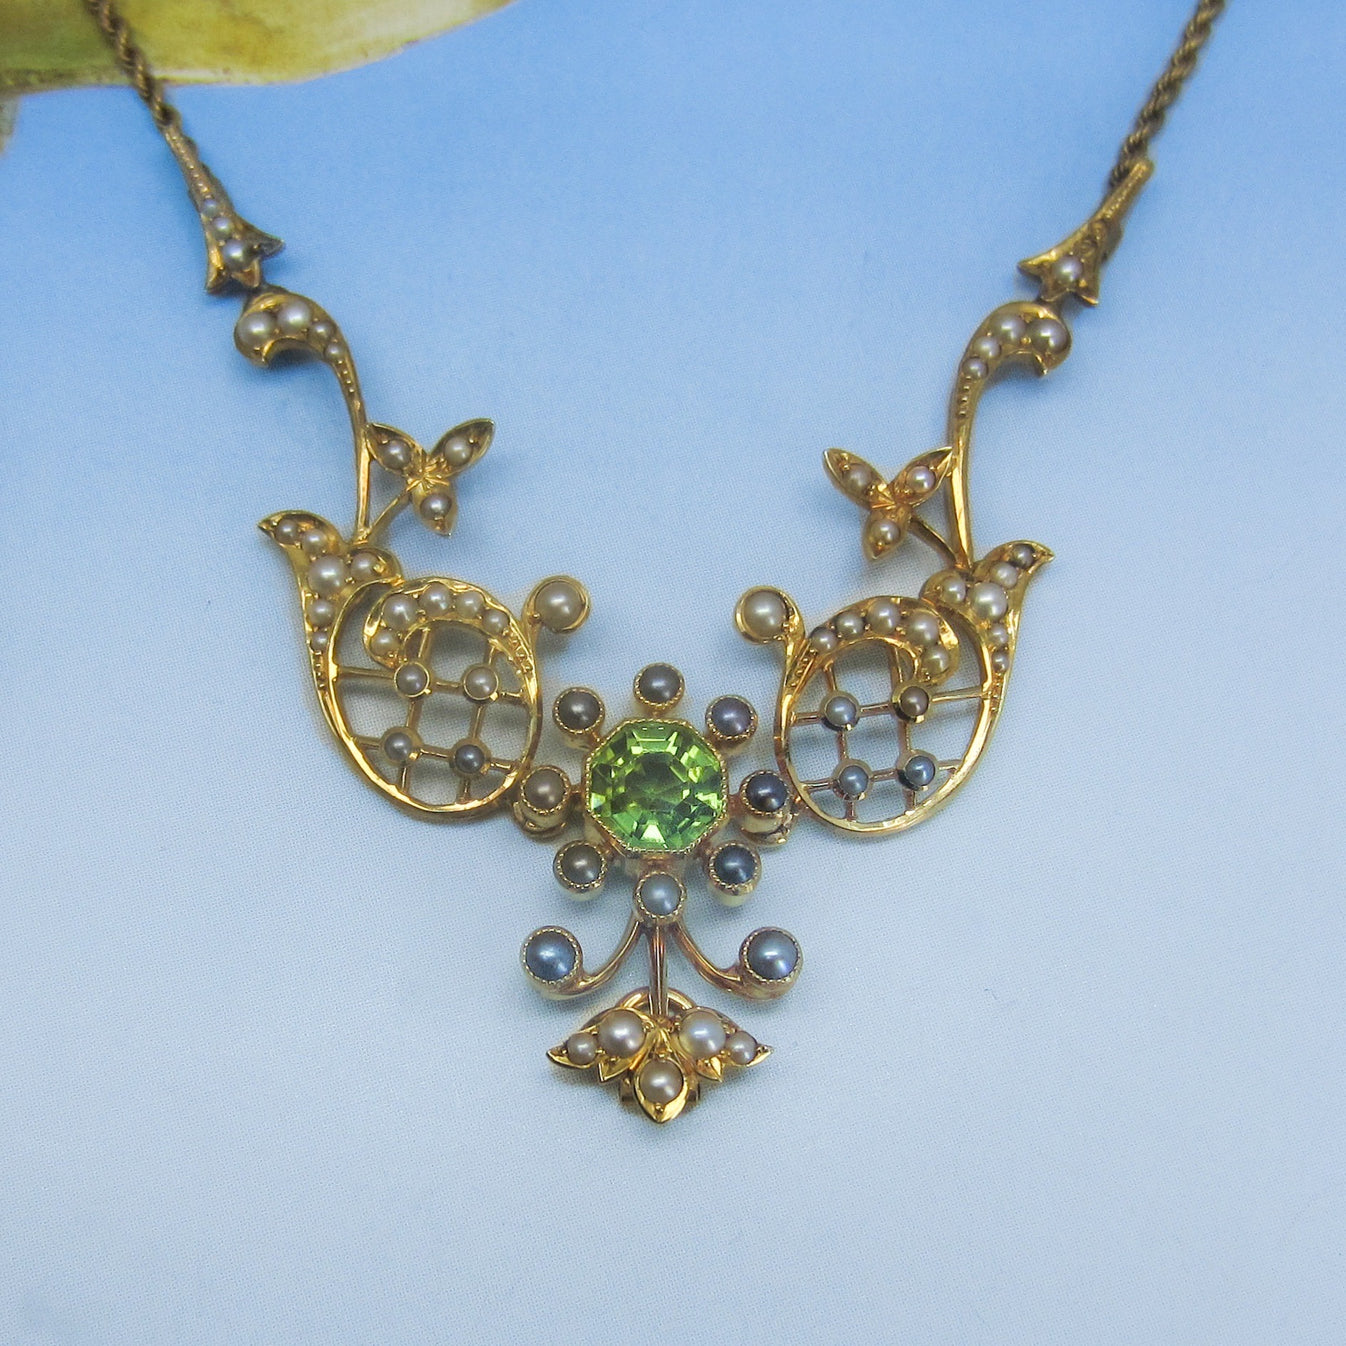 SOLD--Edwardian Peridot and Pearl Necklace 15k, British c. 1900 ...